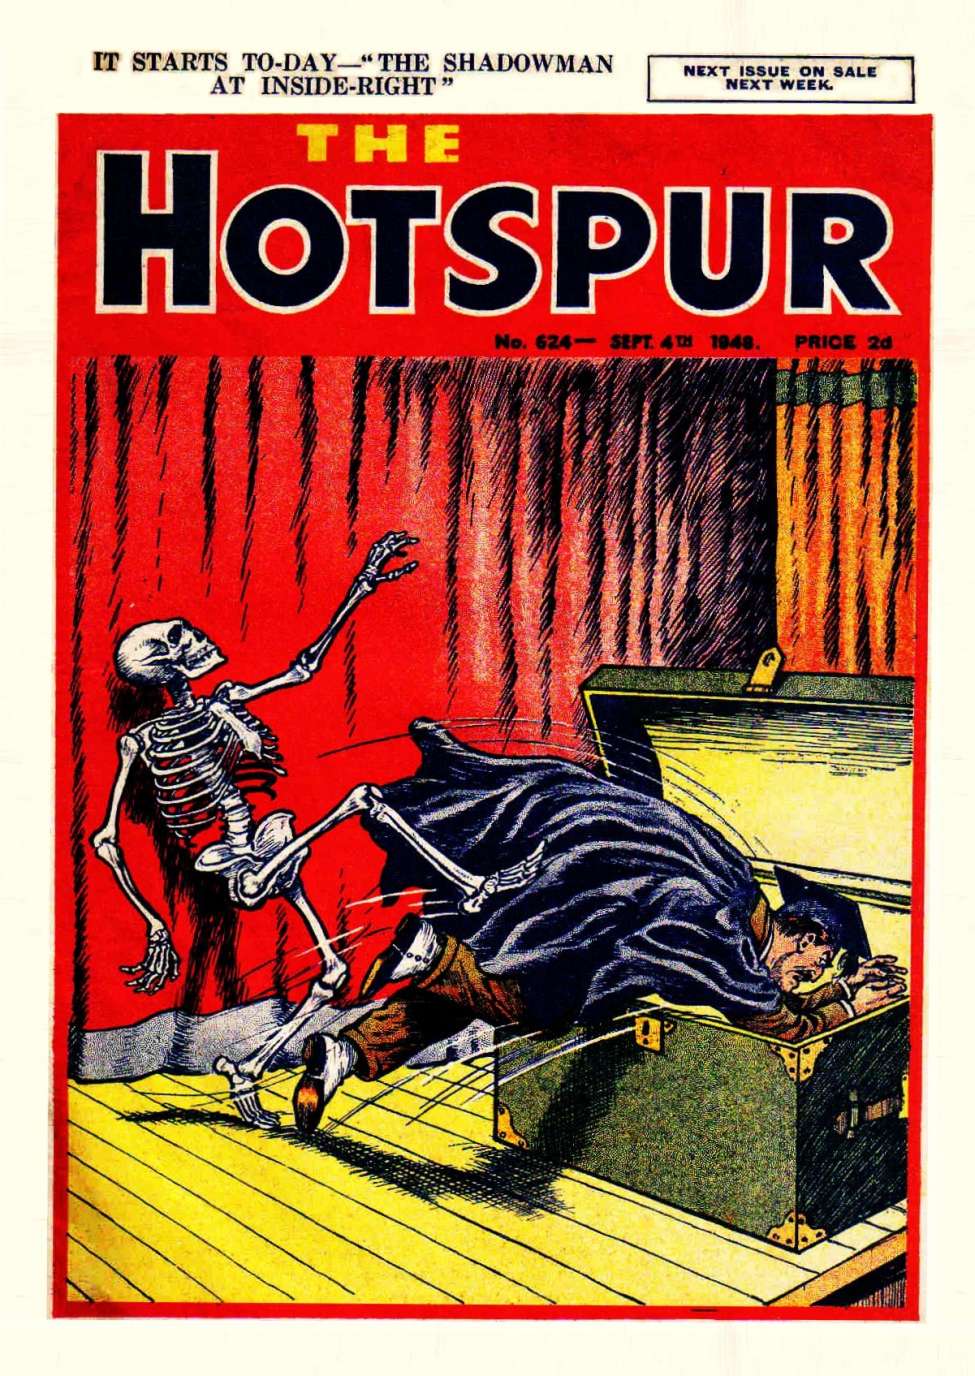 Book Cover For The Hotspur 624